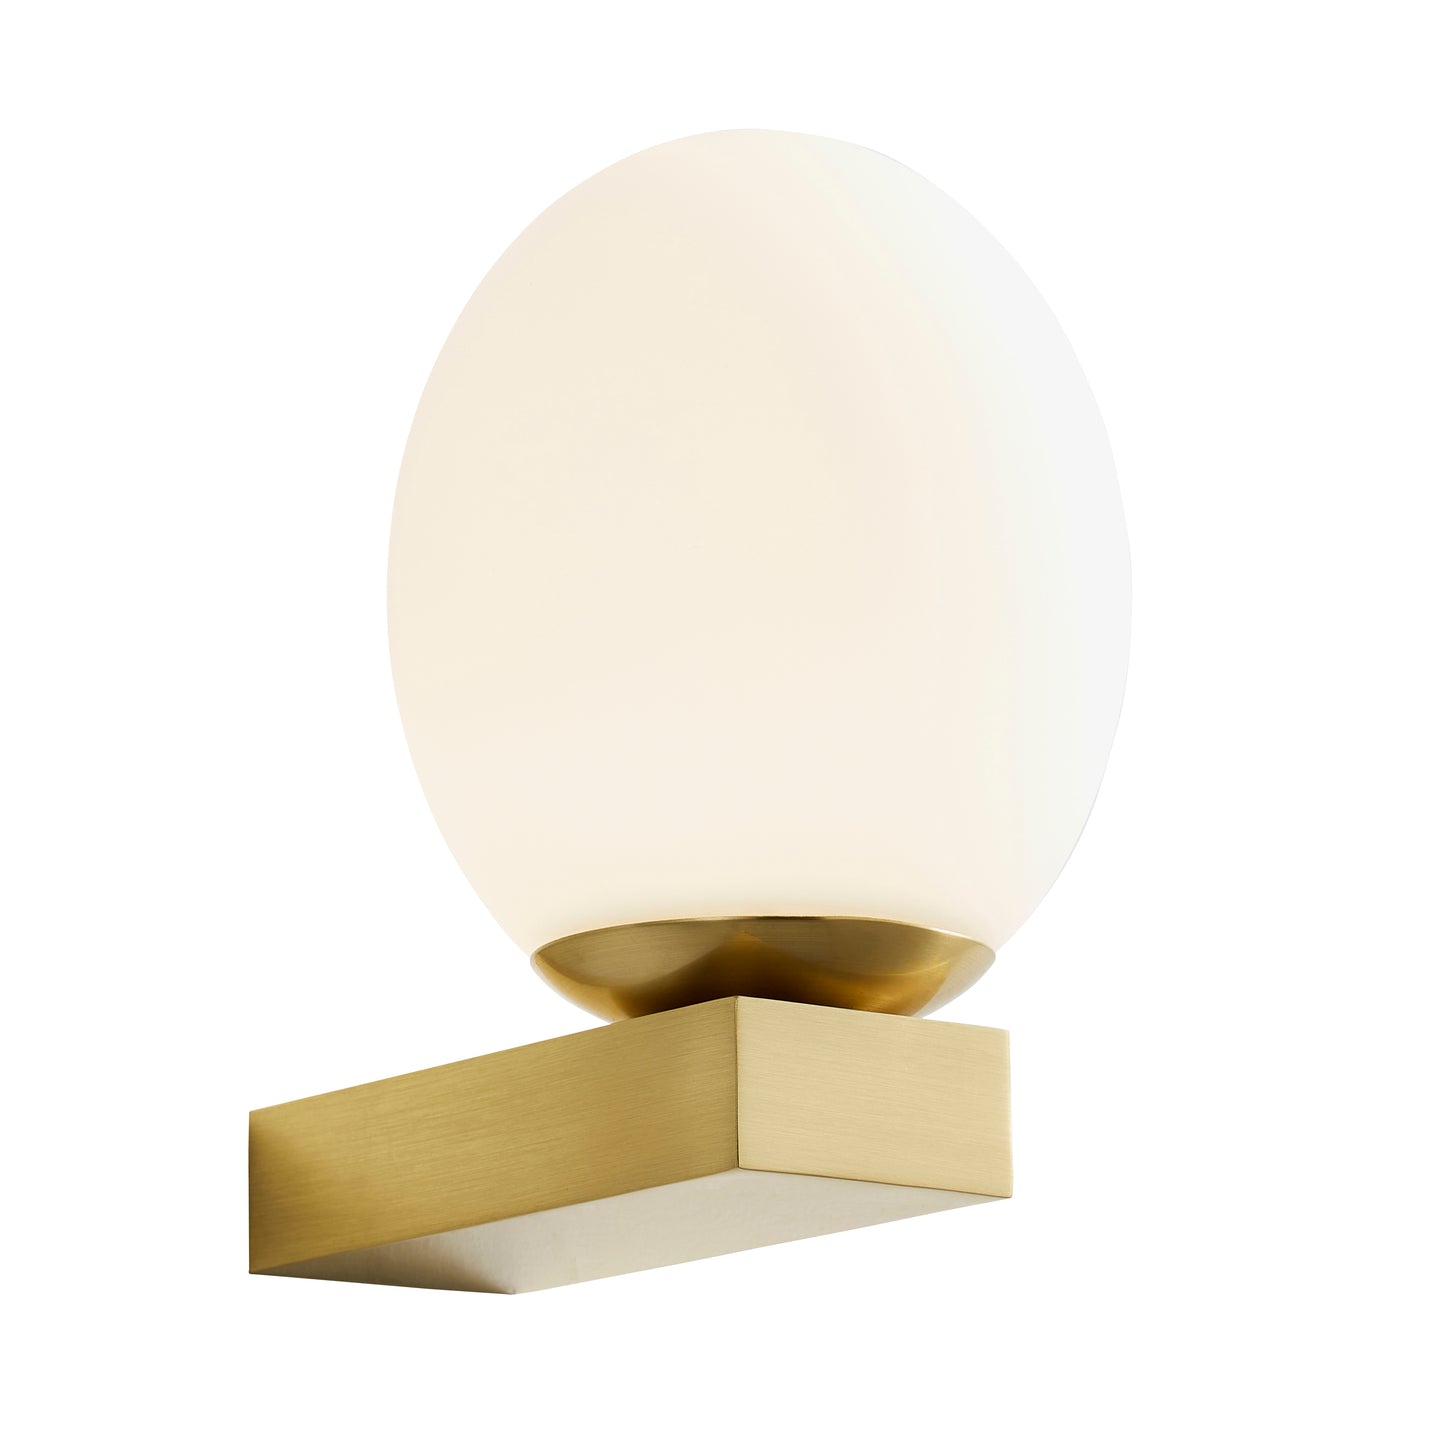 Our Jasper satin brass wall light with white opal glass diffuser adds a touch of opulence and luxury to the walls of your home. The modern light fitting would look perfect installed next to a mirror, on corridors or hallways, bedside and living rooms, this light also has IP44 protection making it suitable for all bathrooms. 